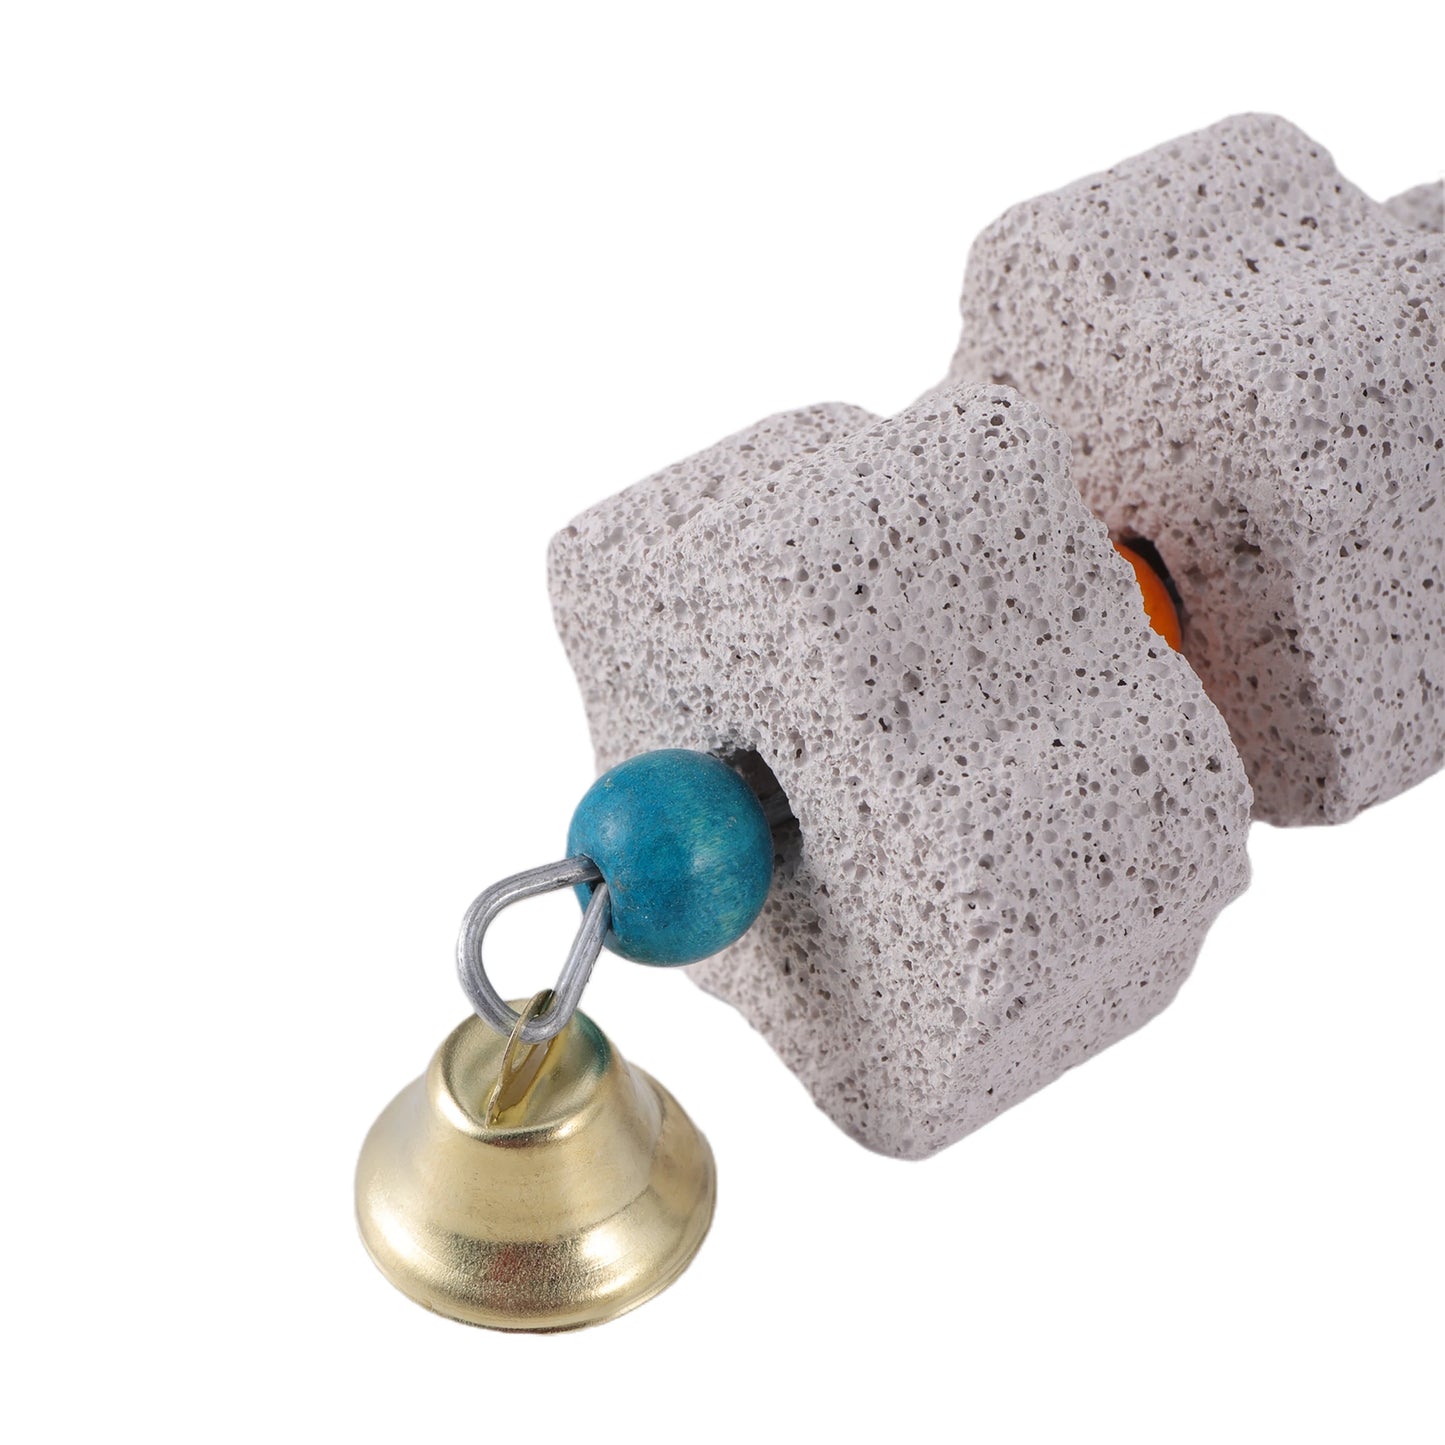 FloraStone Hang & Grind: Flower-Shaped Mineral Grinding Stone Toy for Parrots and Parakeets